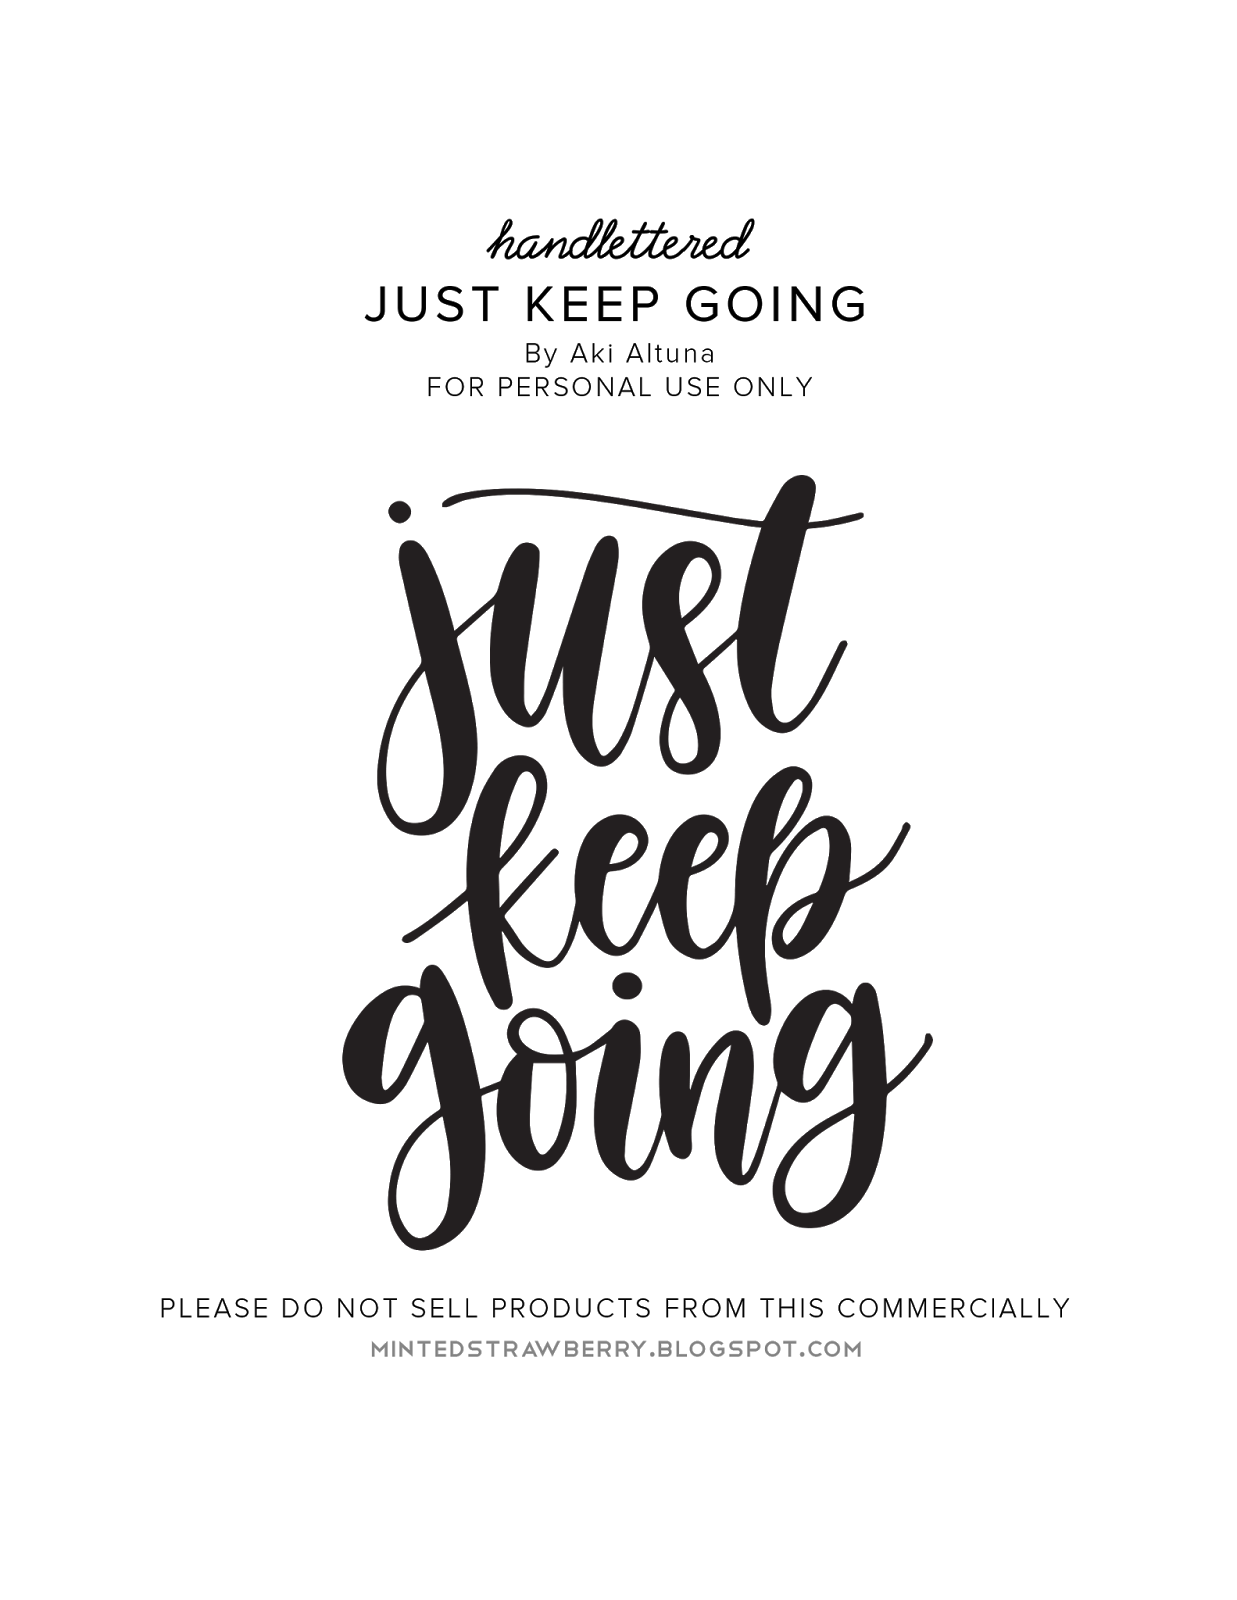 Keep Going Image Free Download PNG HQ PNG Image